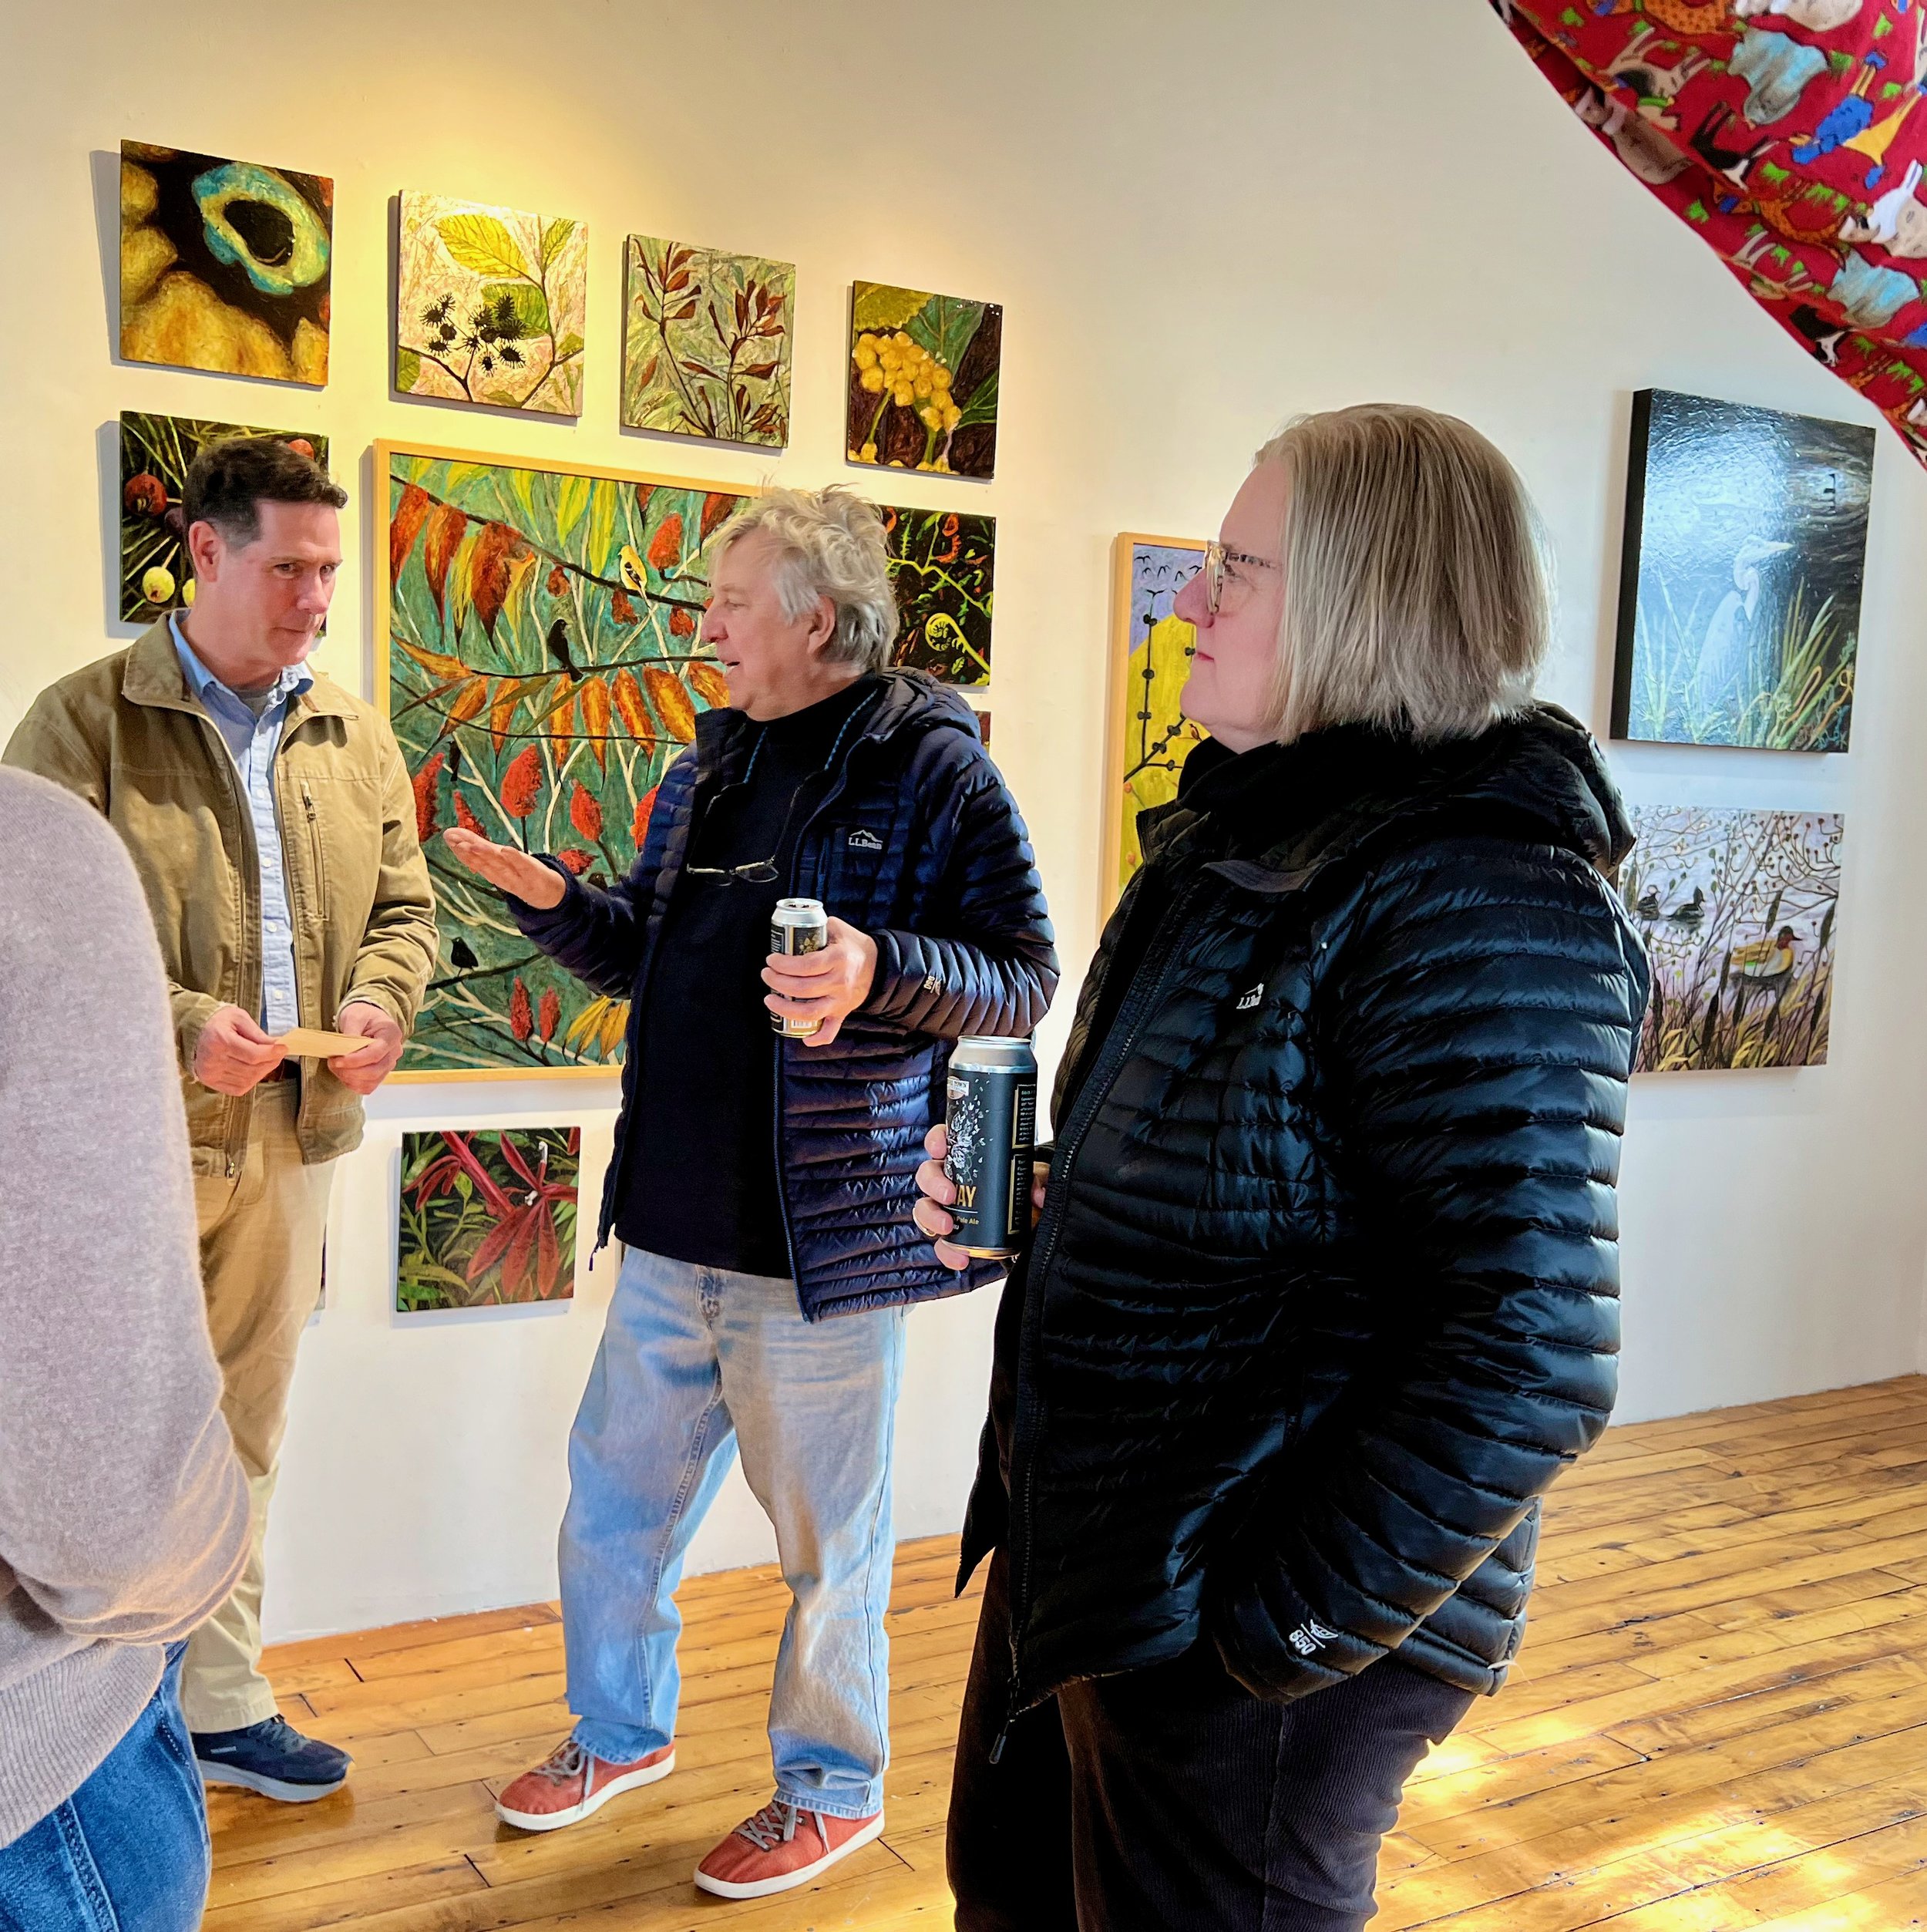 Making Connections, Atlantic Works Gallery, East Boston, 2023